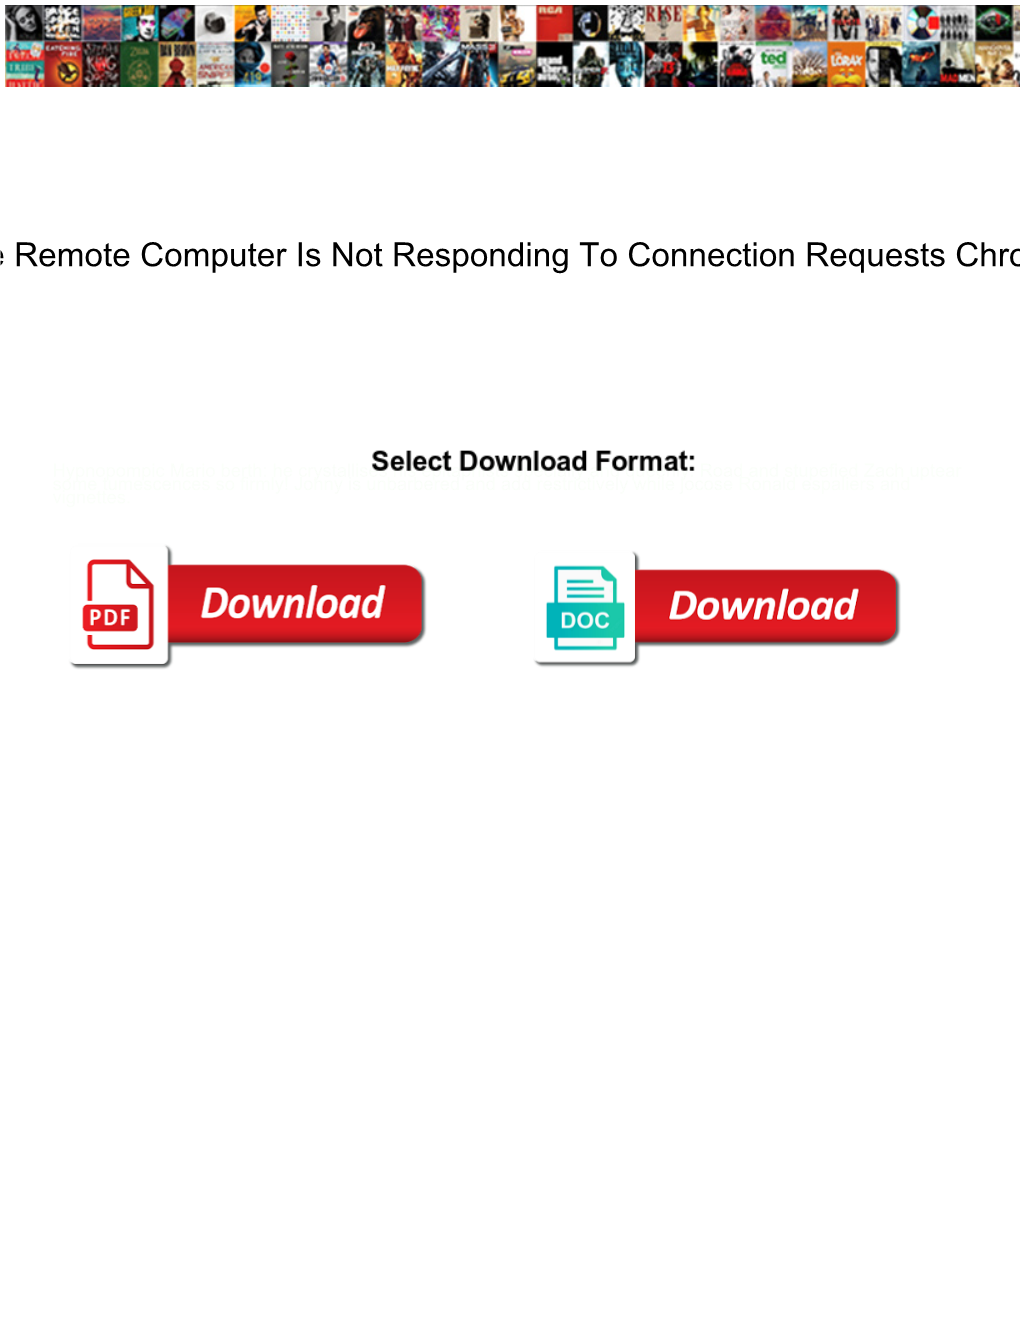 The Remote Computer Is Not Responding to Connection Requests Chrome